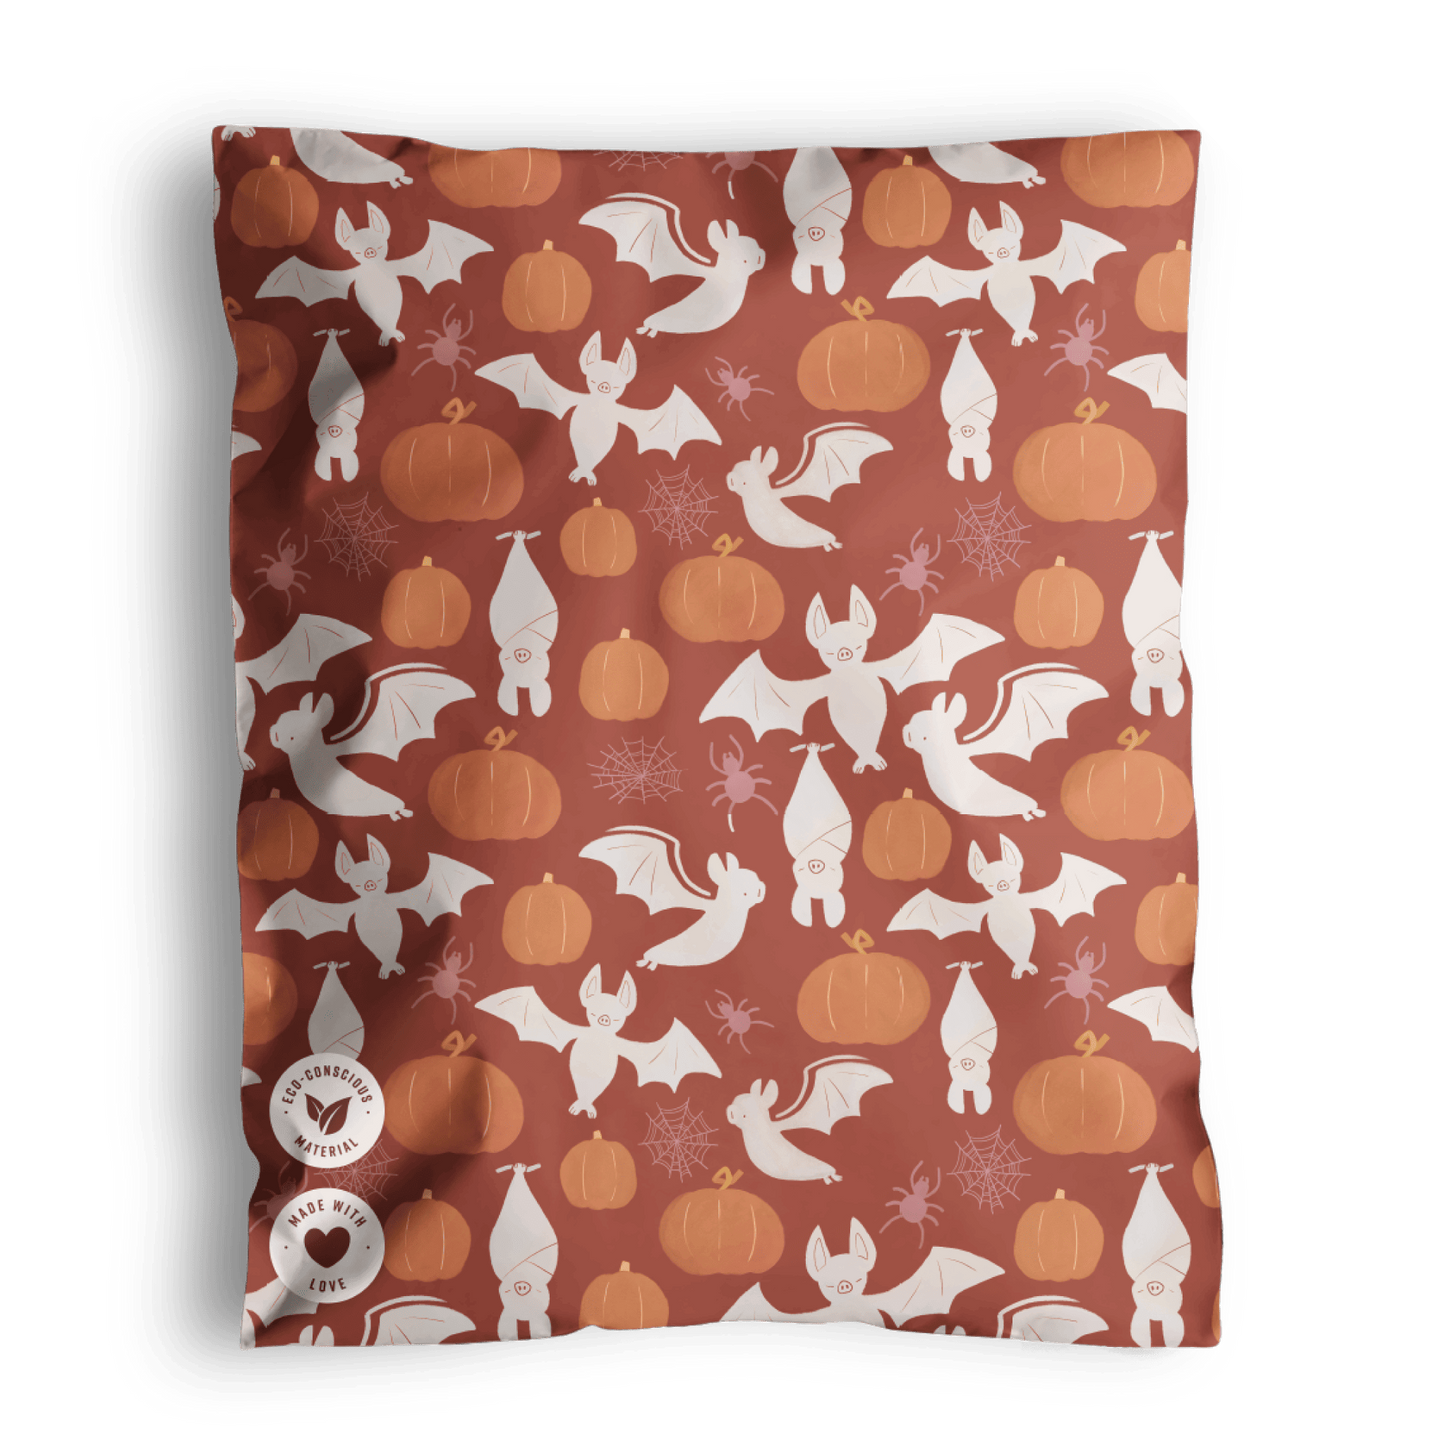 Halloween-themed biodegradable fabric featuring ghosts, pumpkins, and bats on a brown background from impack.co.